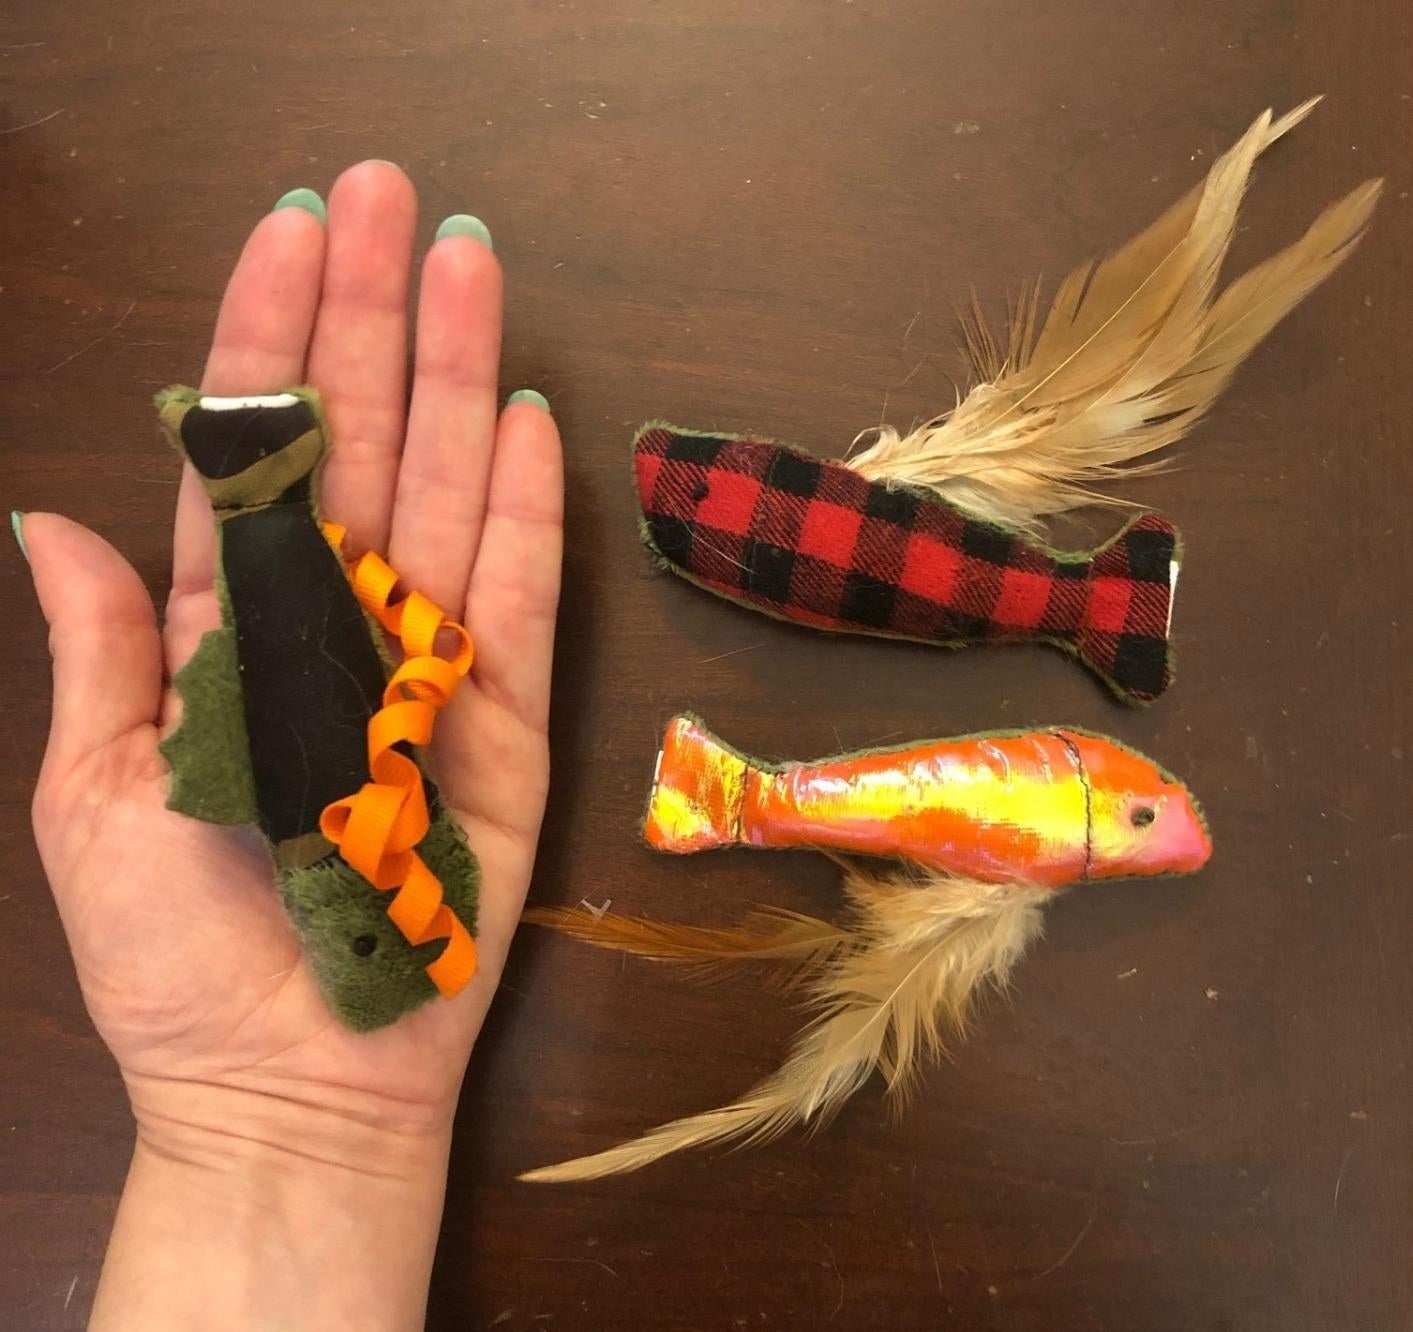 Three of the toys, with one placed on an open palm